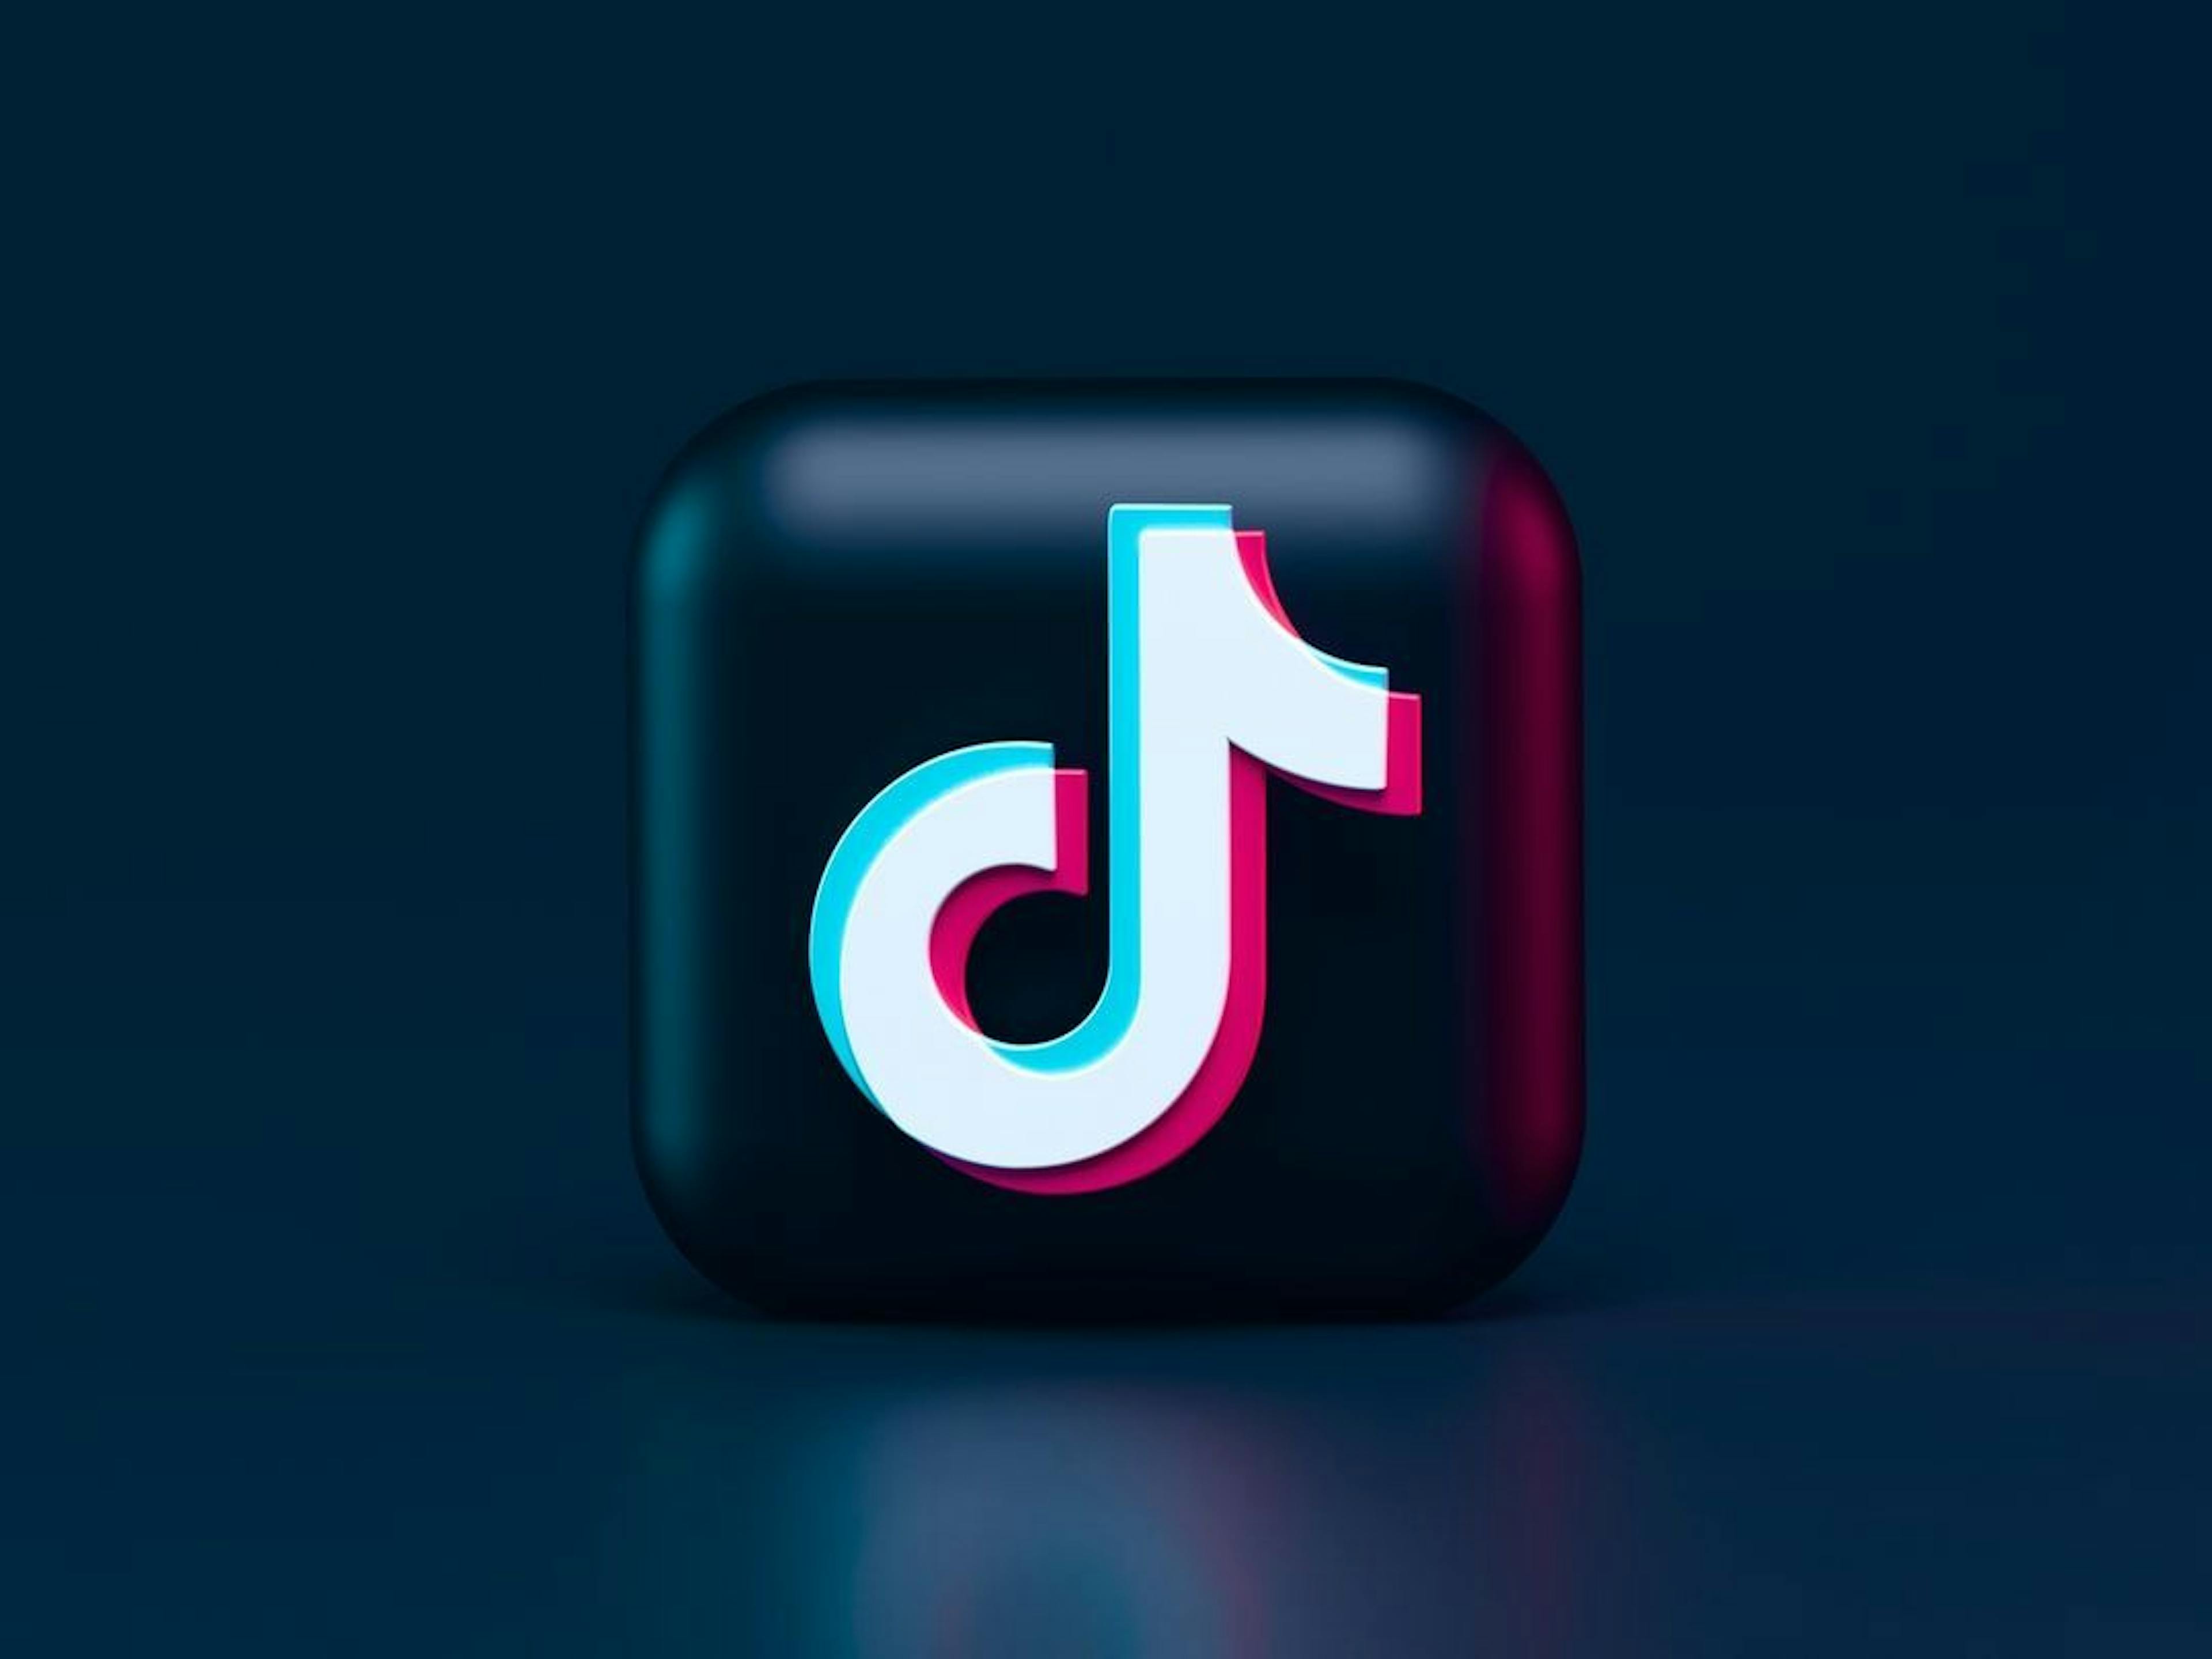 featured image - TikTok, Other Foreign Apps Could be Subject to New Limits as US Lawmakers Consider New Rules